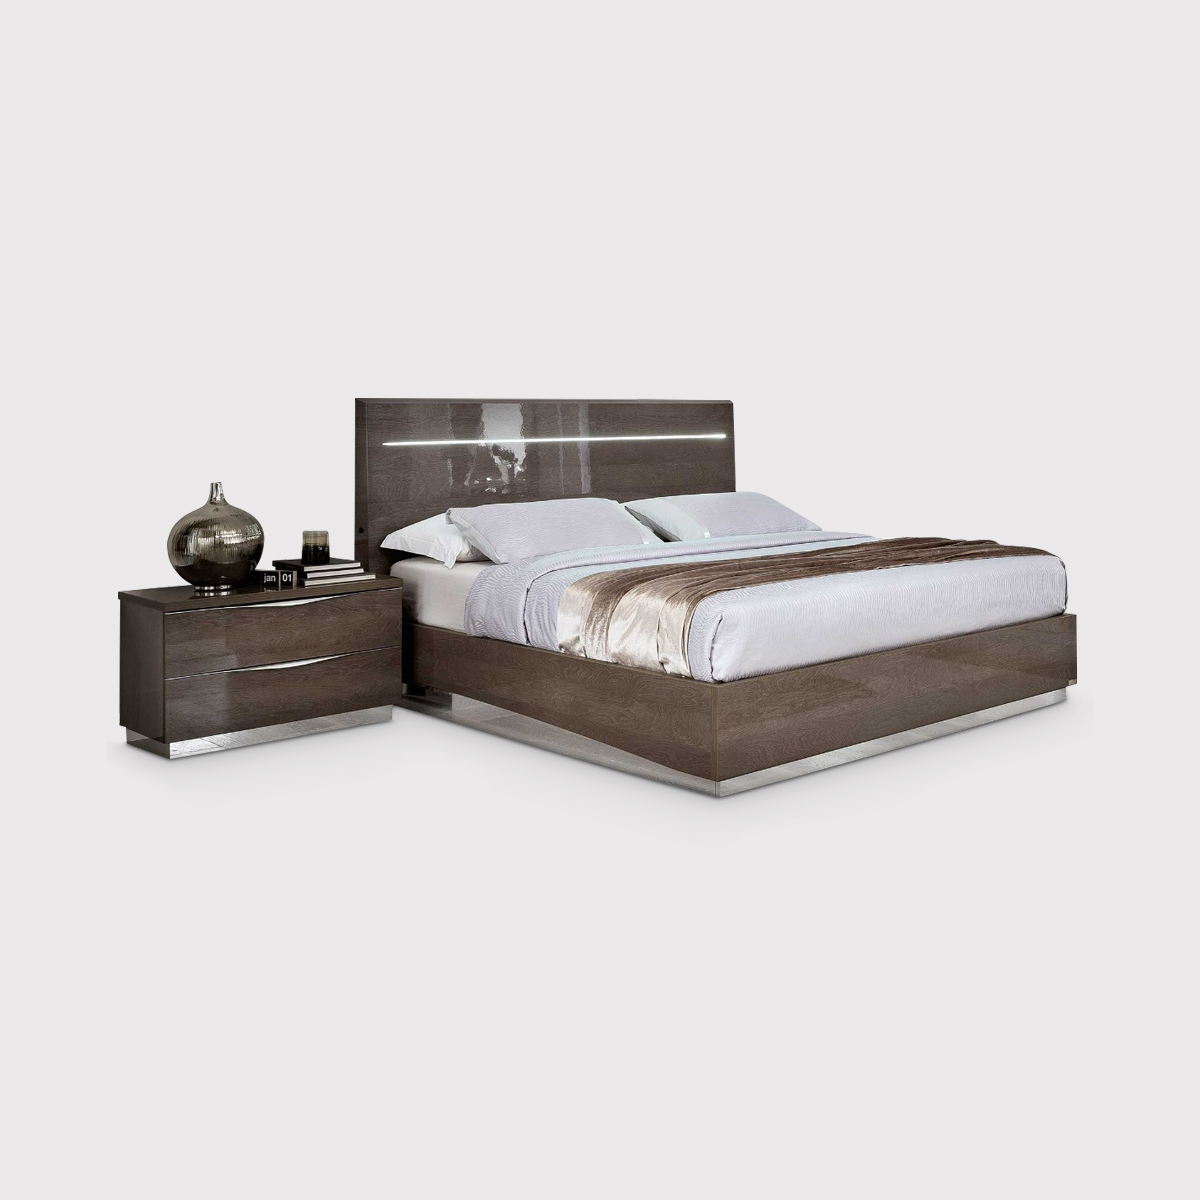 Lutyen 120cm Small Double Bed With Orthopedic Wooden Slats, Grey Gloss | W128cm | Barker & Stonehouse